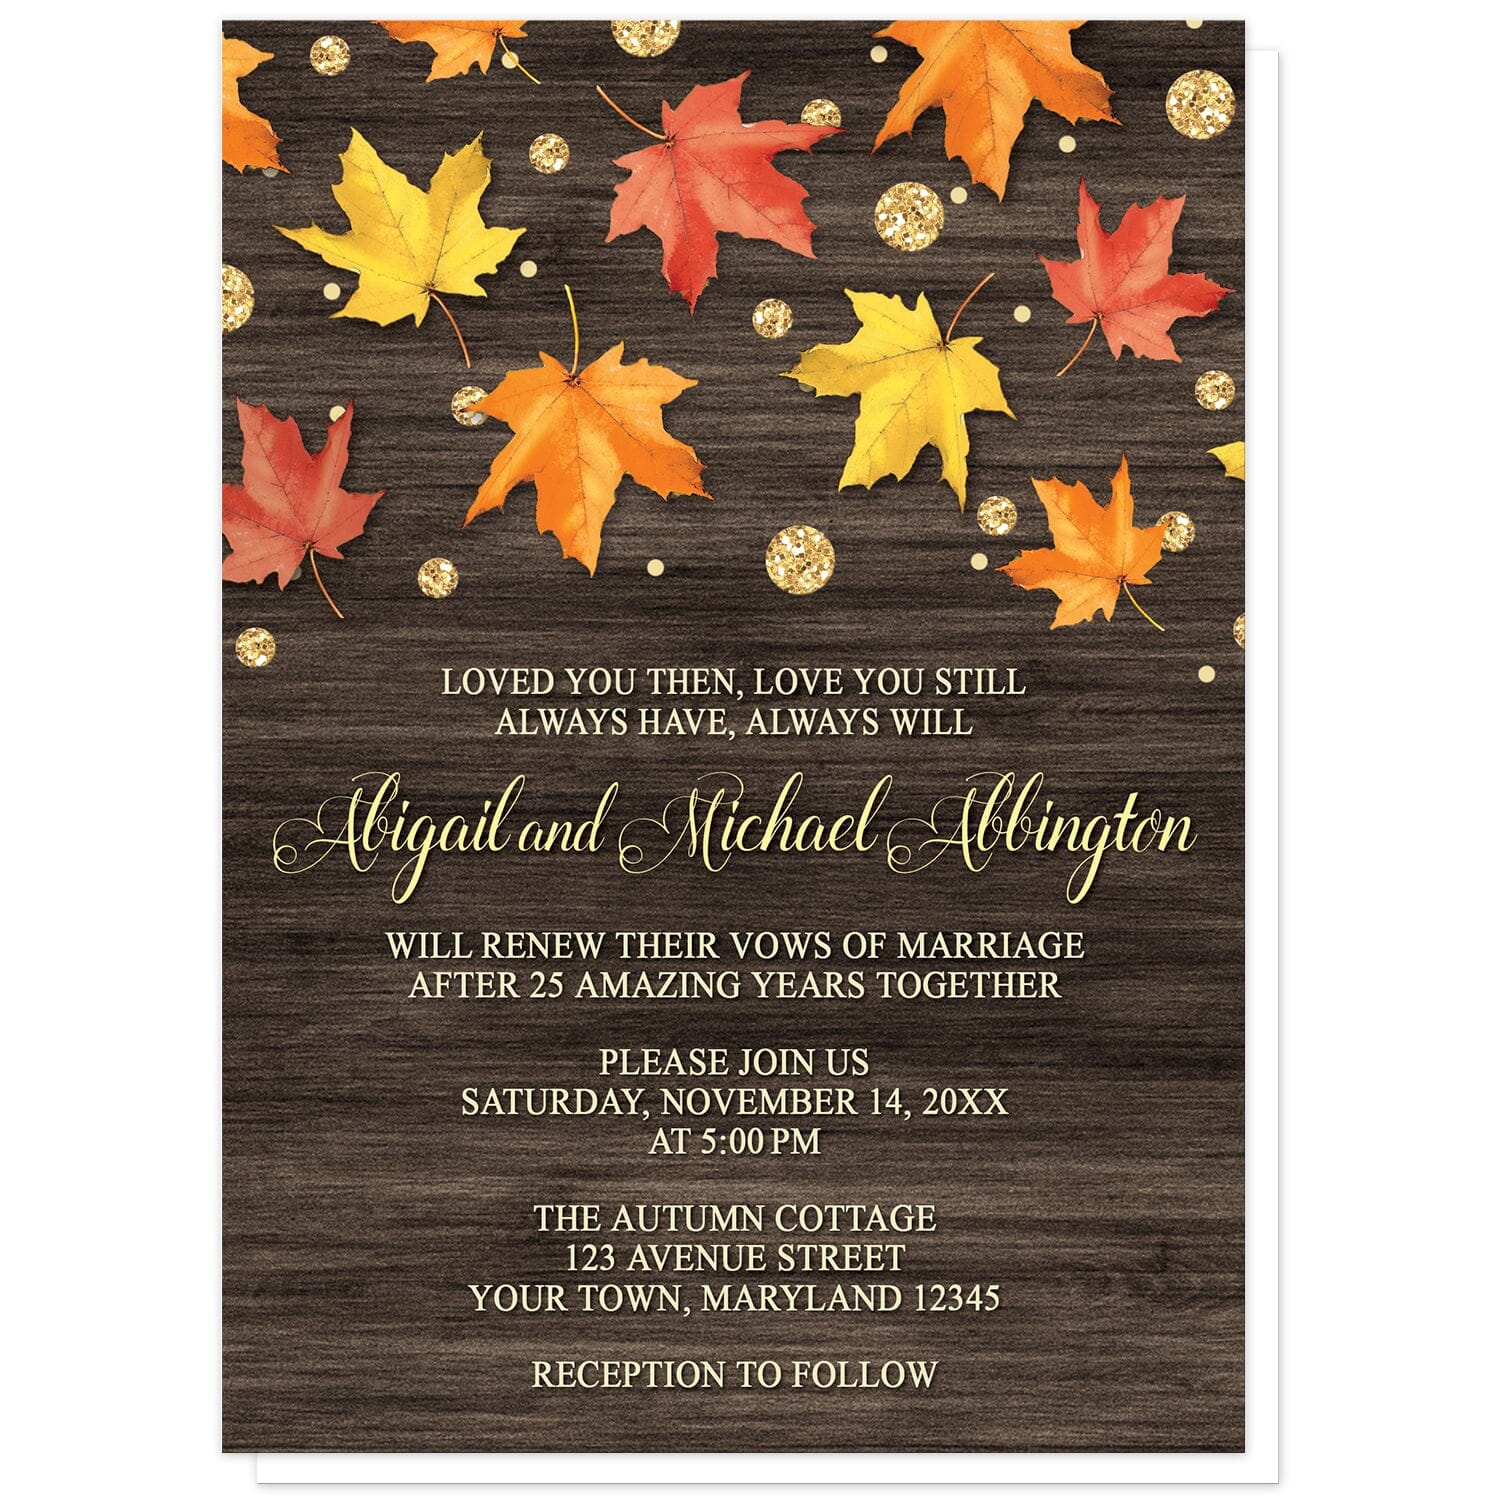 Falling Leaves with Gold Autumn Vow Renewal Invitations at Artistically Invited. Beautiful rustic falling leaves with gold autumn vow renewal invitations with red, orange, and yellow fall leaves scattered and falling along the top, coupled with gold-colored glitter-illustrated circles, over a dark brown wood background. Your personalized vow renewal celebration details are custom printed in very light yellow and gold over the wood background.